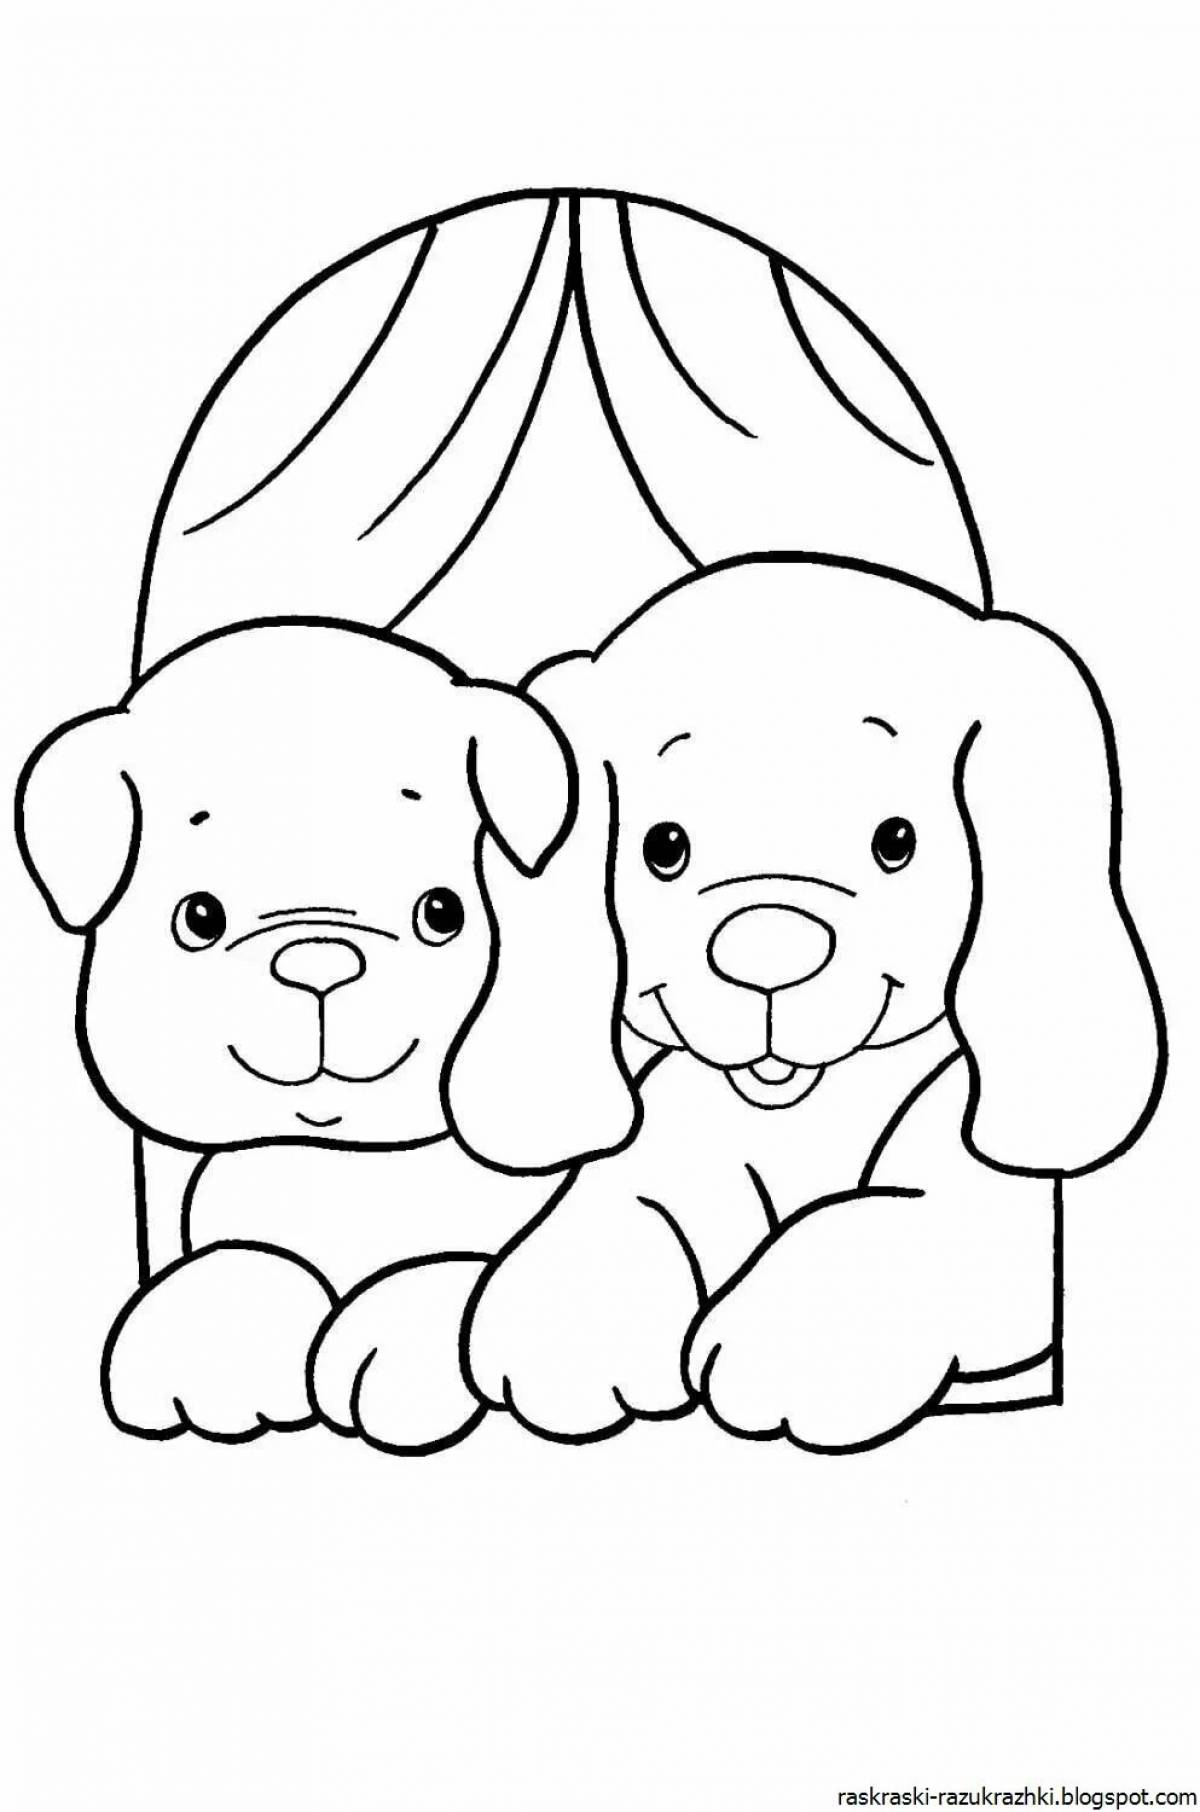 Colorful puppy coloring page